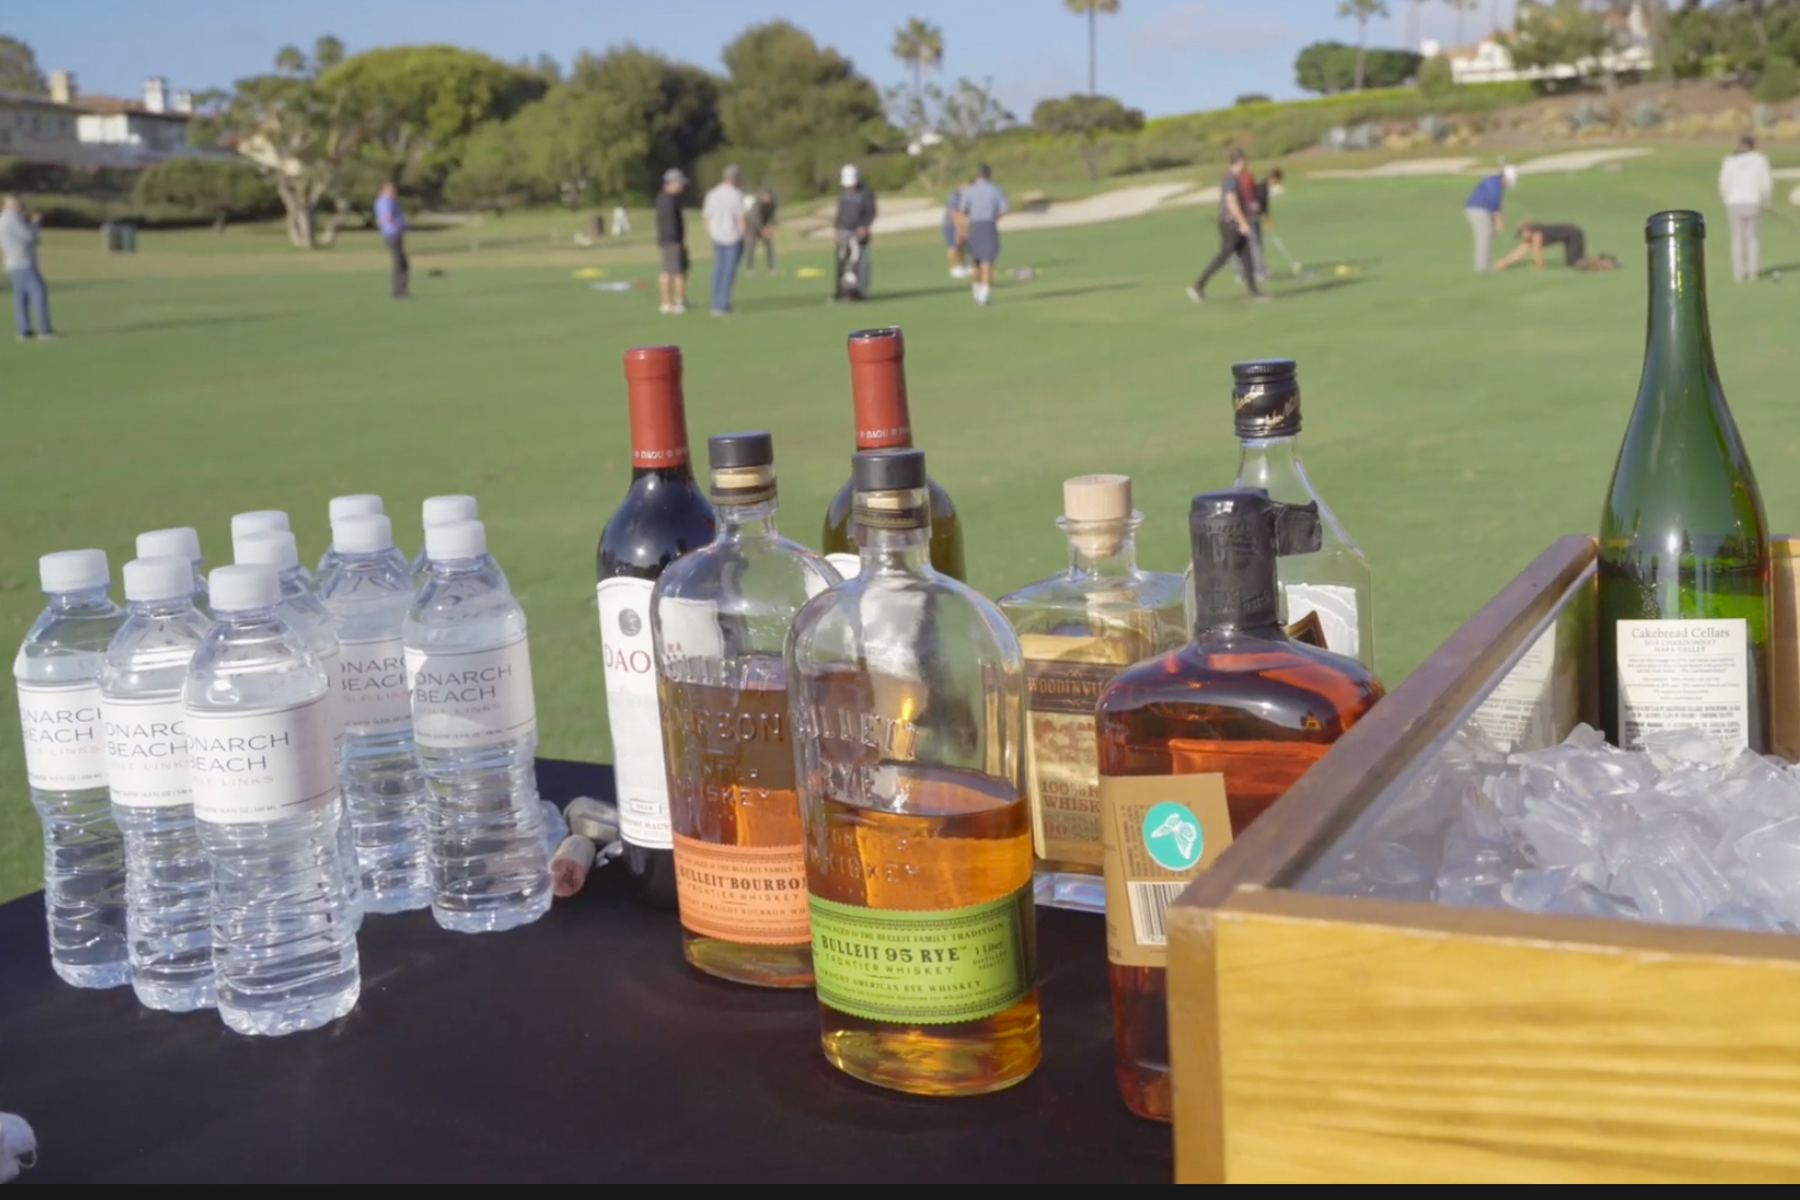 Group Events like Wedges, Wine & Whiskey Create Welcoming Environment for  Players of All Skill Levels